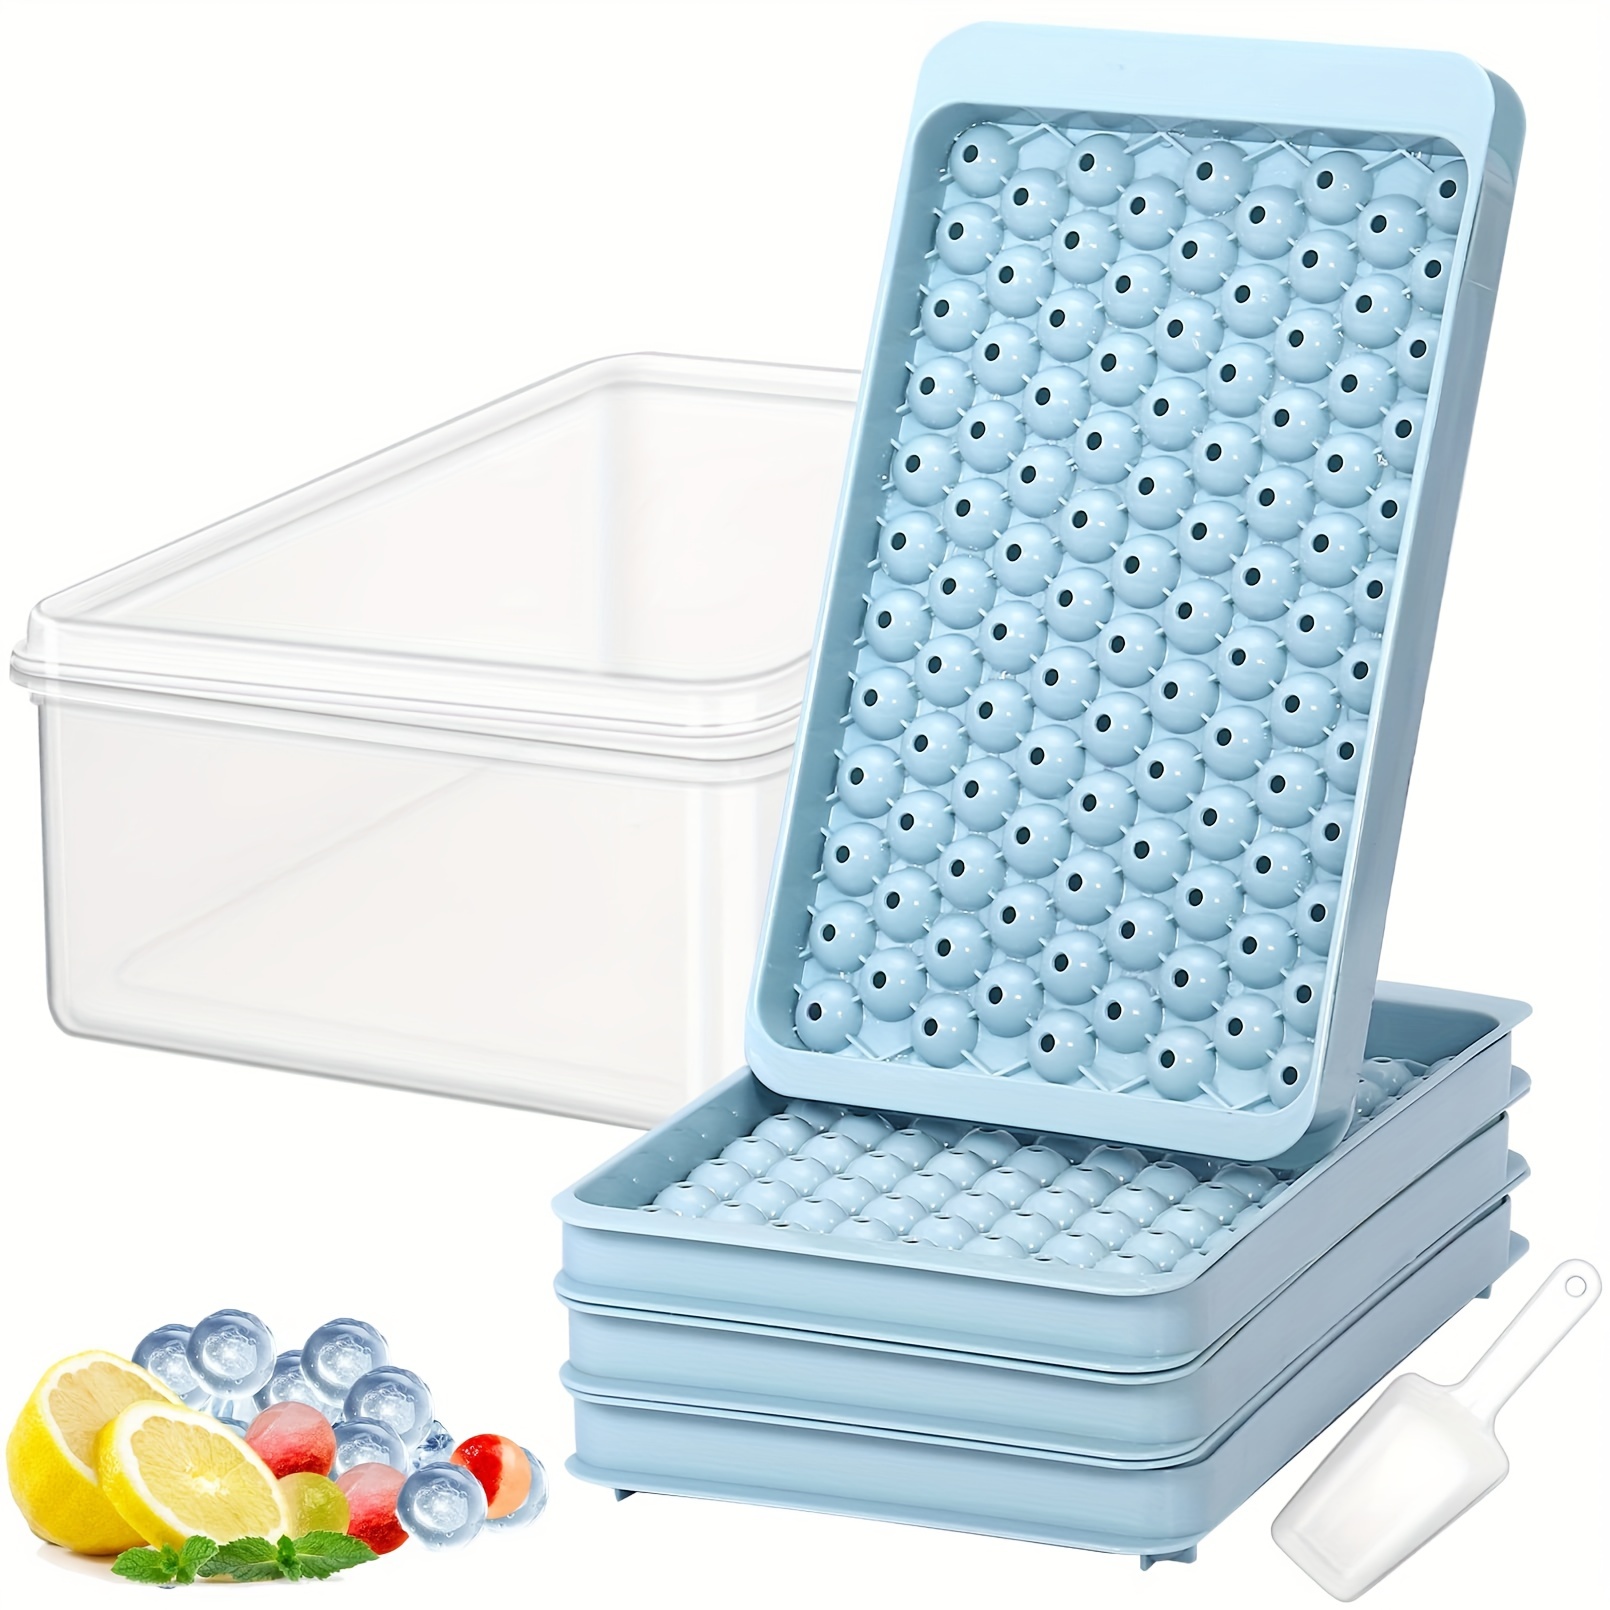  Small Ice Cube Trays with Lid - Mini Ice Trays for